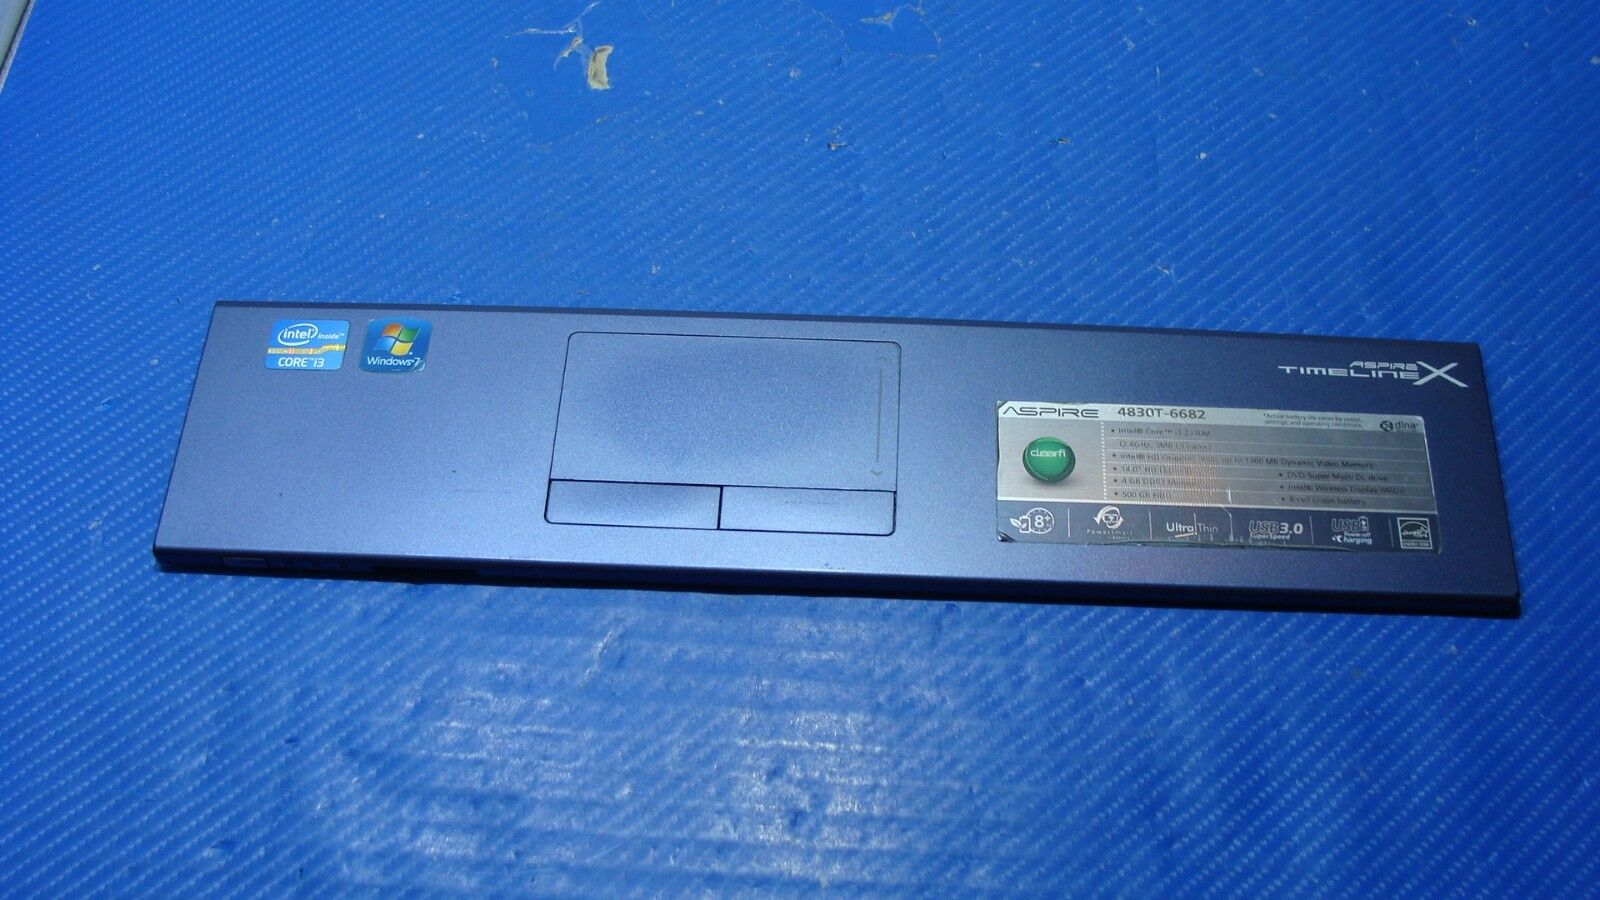 Acer 4830T-6682 14 Genuine Laptop Palmrest with Touchpad AP0IO000310